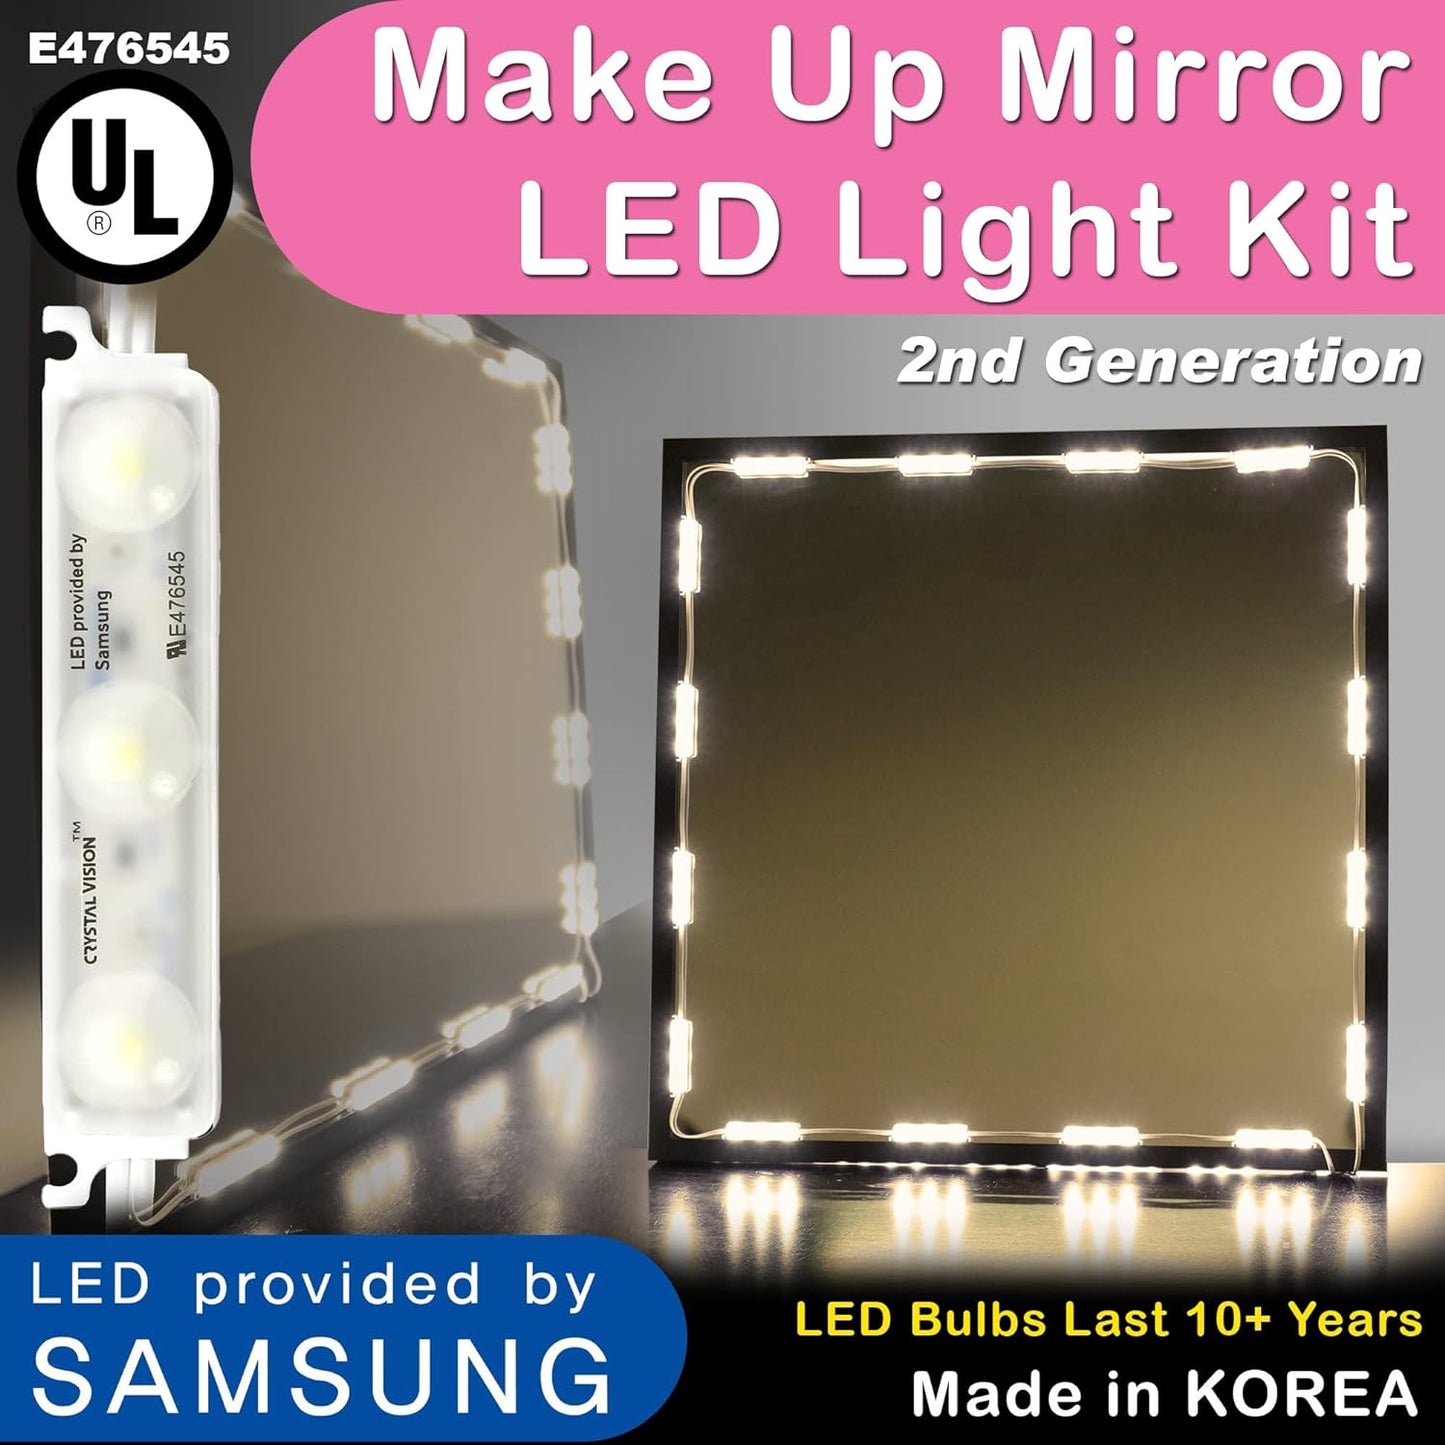 The image is an advertisement for a "Make Up Mirror LED Light Kit" labeled as the 2nd Generation. It highlights features such as LED bulbs provided by SAMSUNG, a UL certification, a lifespan of over 10 years, and the fact that it is made in Korea. The visual shows the LED lights around a mirror, demonstrating how they illuminate the mirror's perimeter.